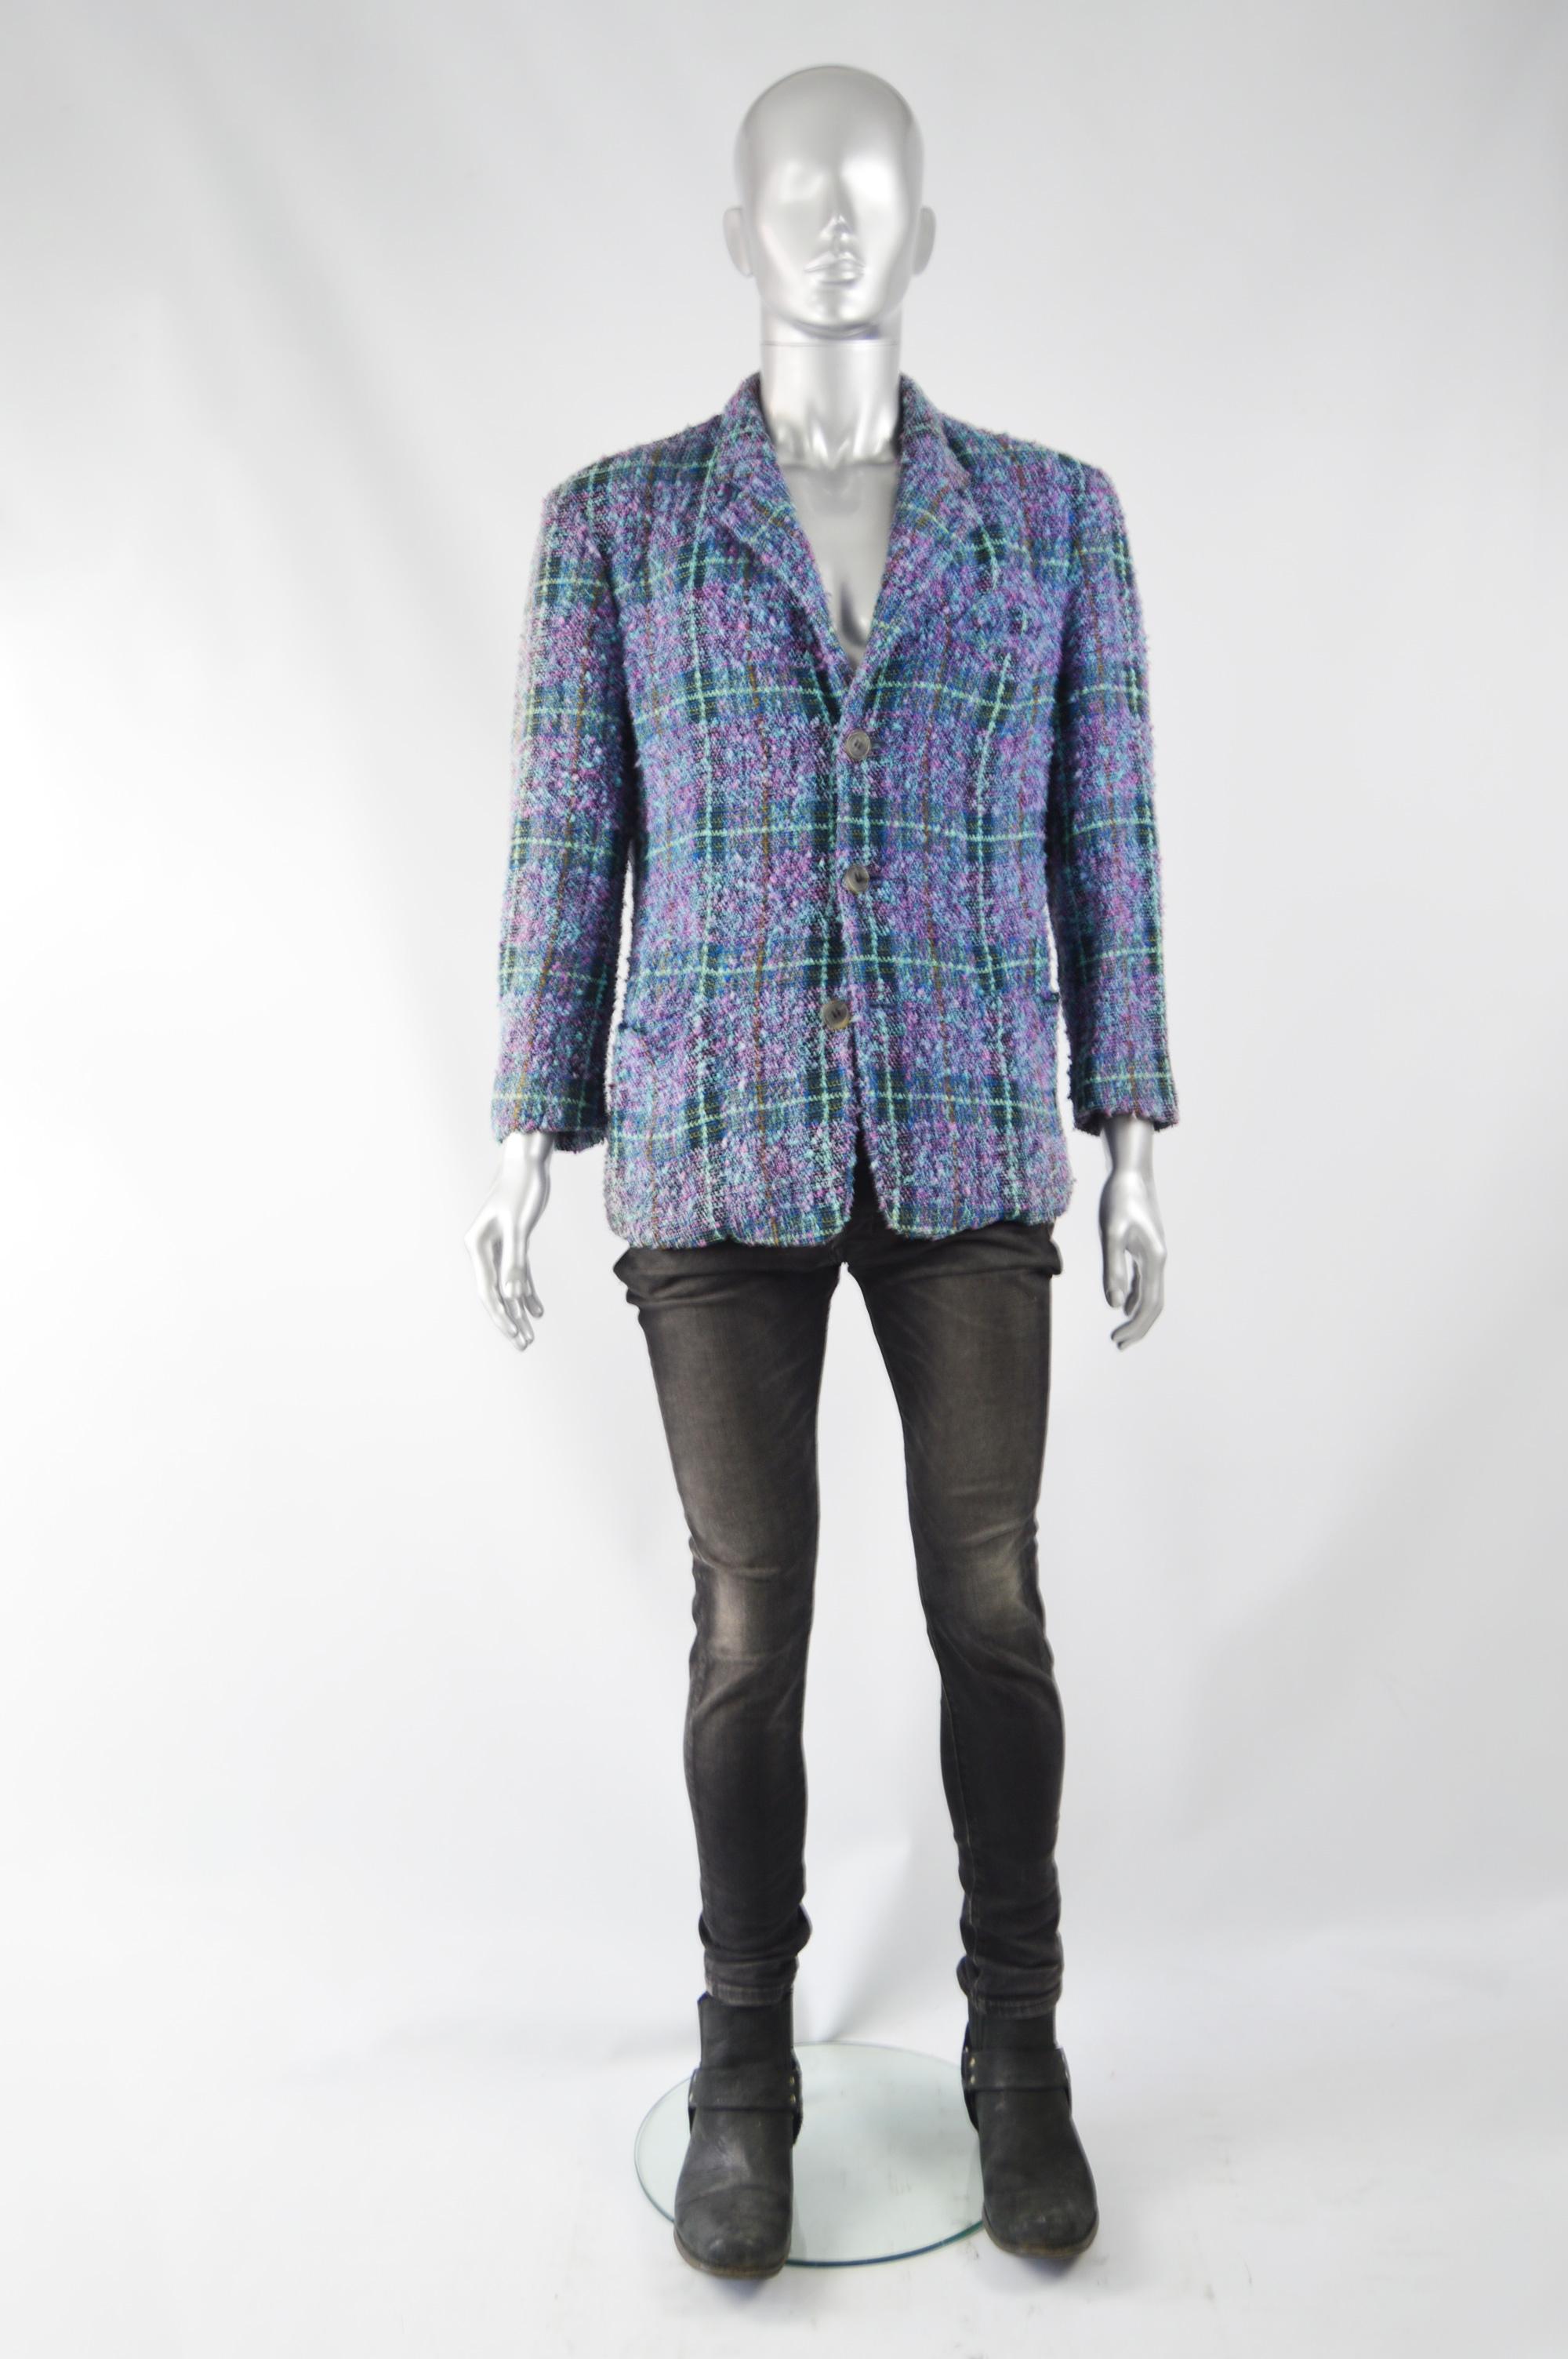 An amazing and rare vintage men's blazer jacket from the 80s by iconic Japanese fashion designer. Yoshiyuki Konishi for his Ficce label. In a multicolored boucle tweed with a plaid checked pattern throughout and a Pucci style printed lining.

Size: